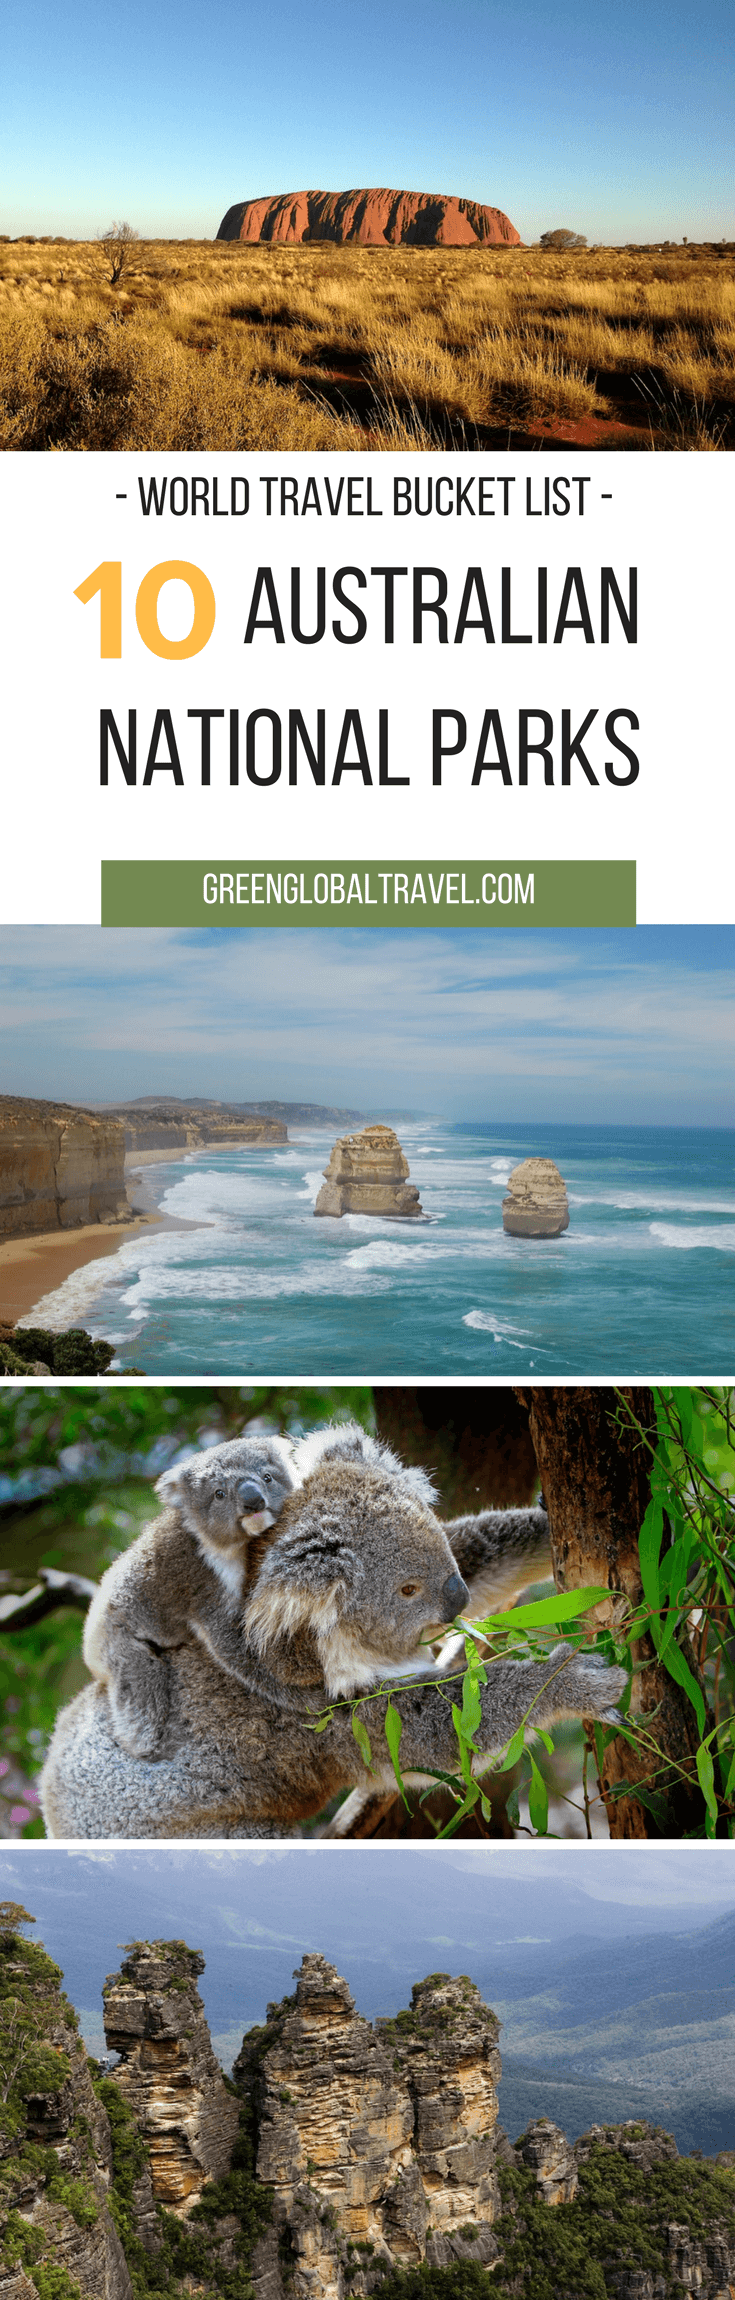 The Top 10 Australian National Parks for Your World Travel Bucket List, including Great Otway, Kakadu, Daintree, Blue Mountains, and more. via @greenglobaltrvl